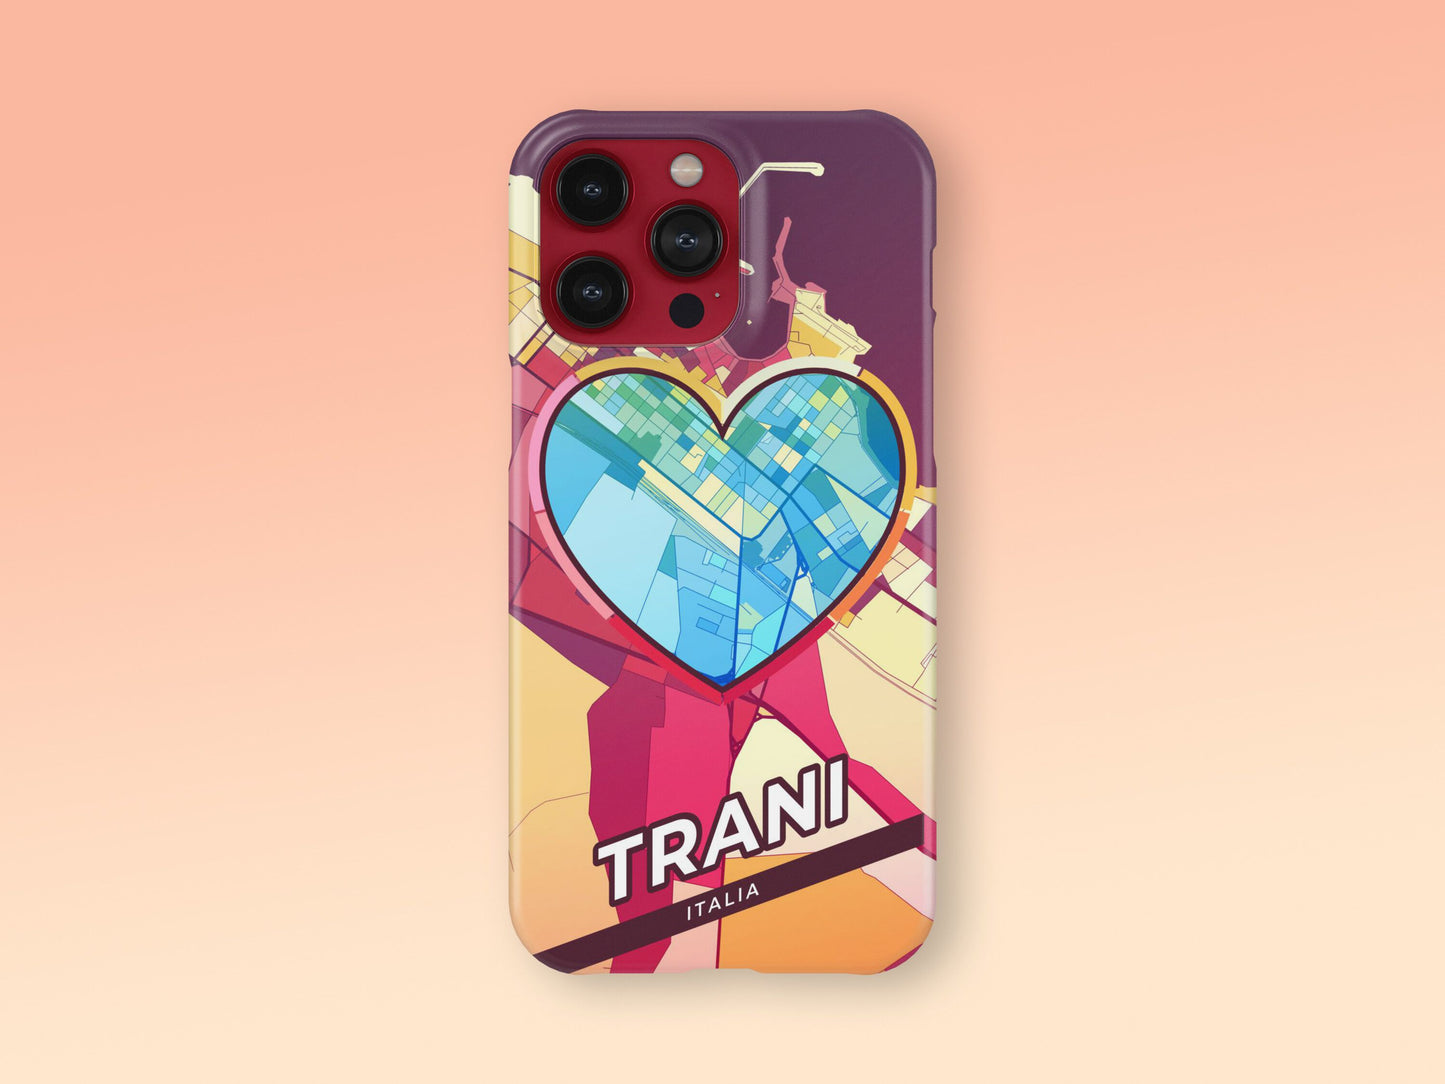 Trani Italy slim phone case with colorful icon 2